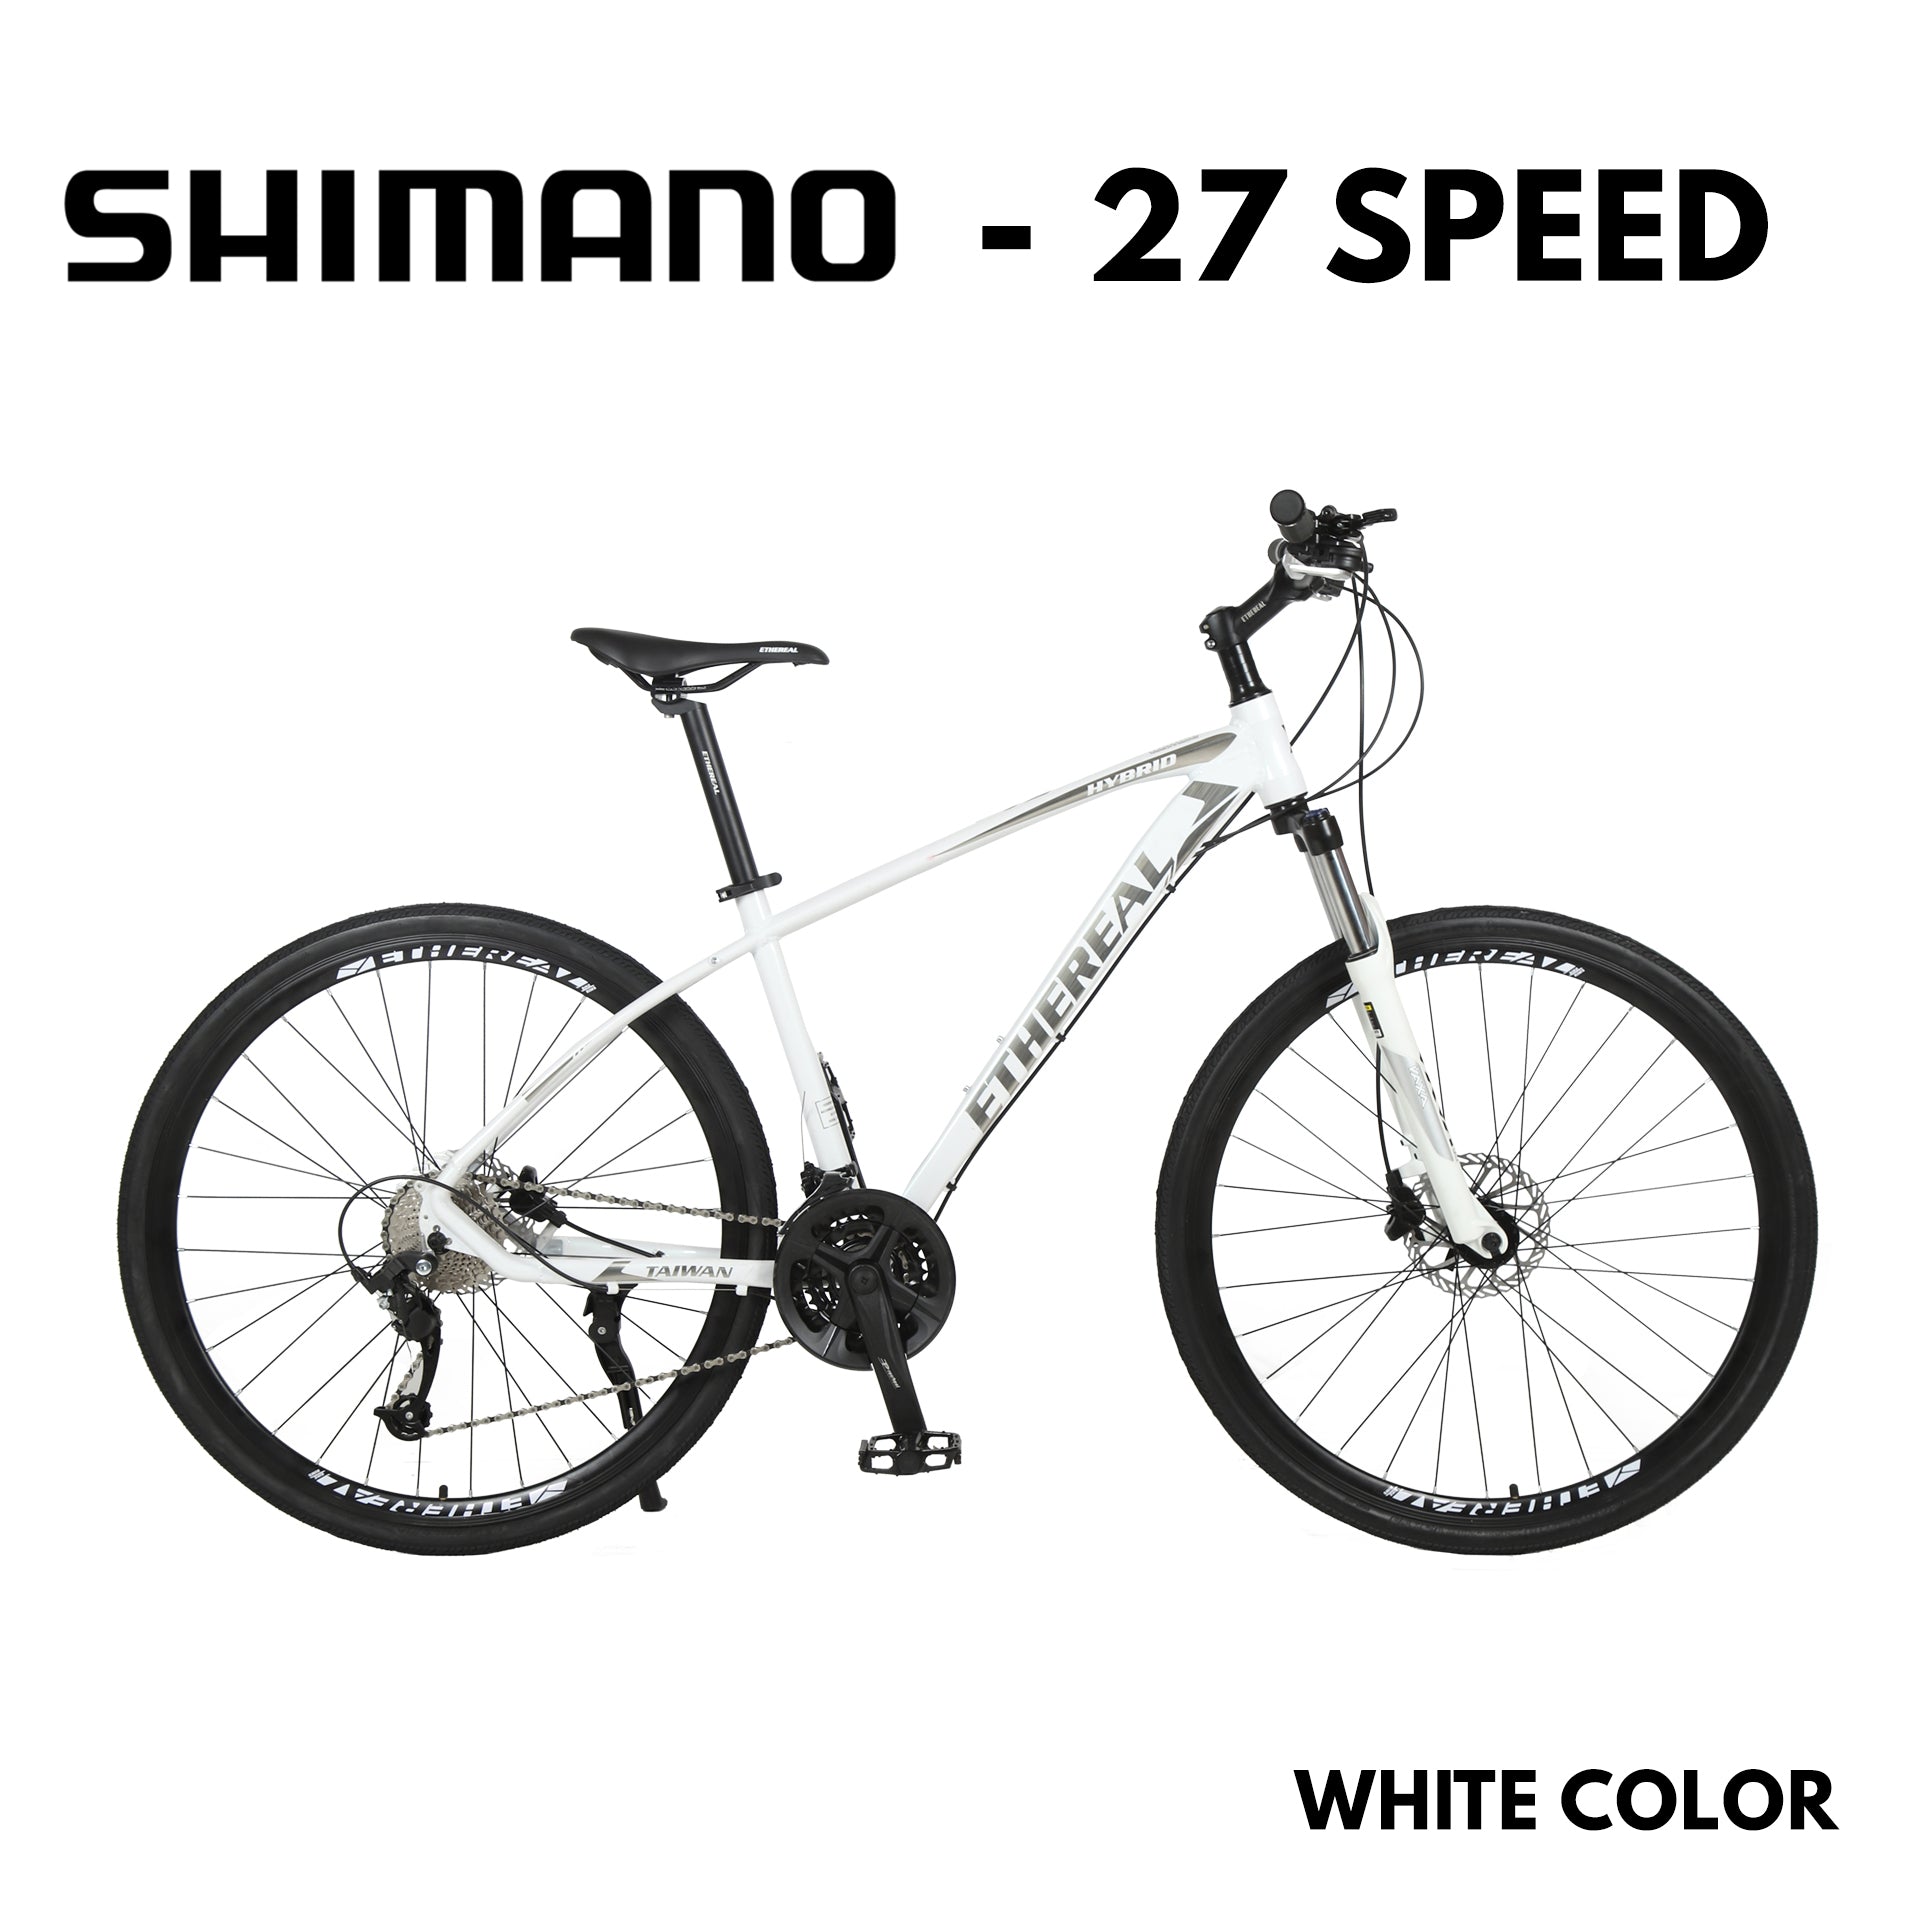 High-performance Ethereal Hybrid 700C MTB with Shimano Altus 3 X 9 Speed derailleur, full hydraulic Taiwan Gemma brakes, and ergonomic Ethereal Gel Saddle - The Bike Atrium - Best Bicycle Shop in Singapore